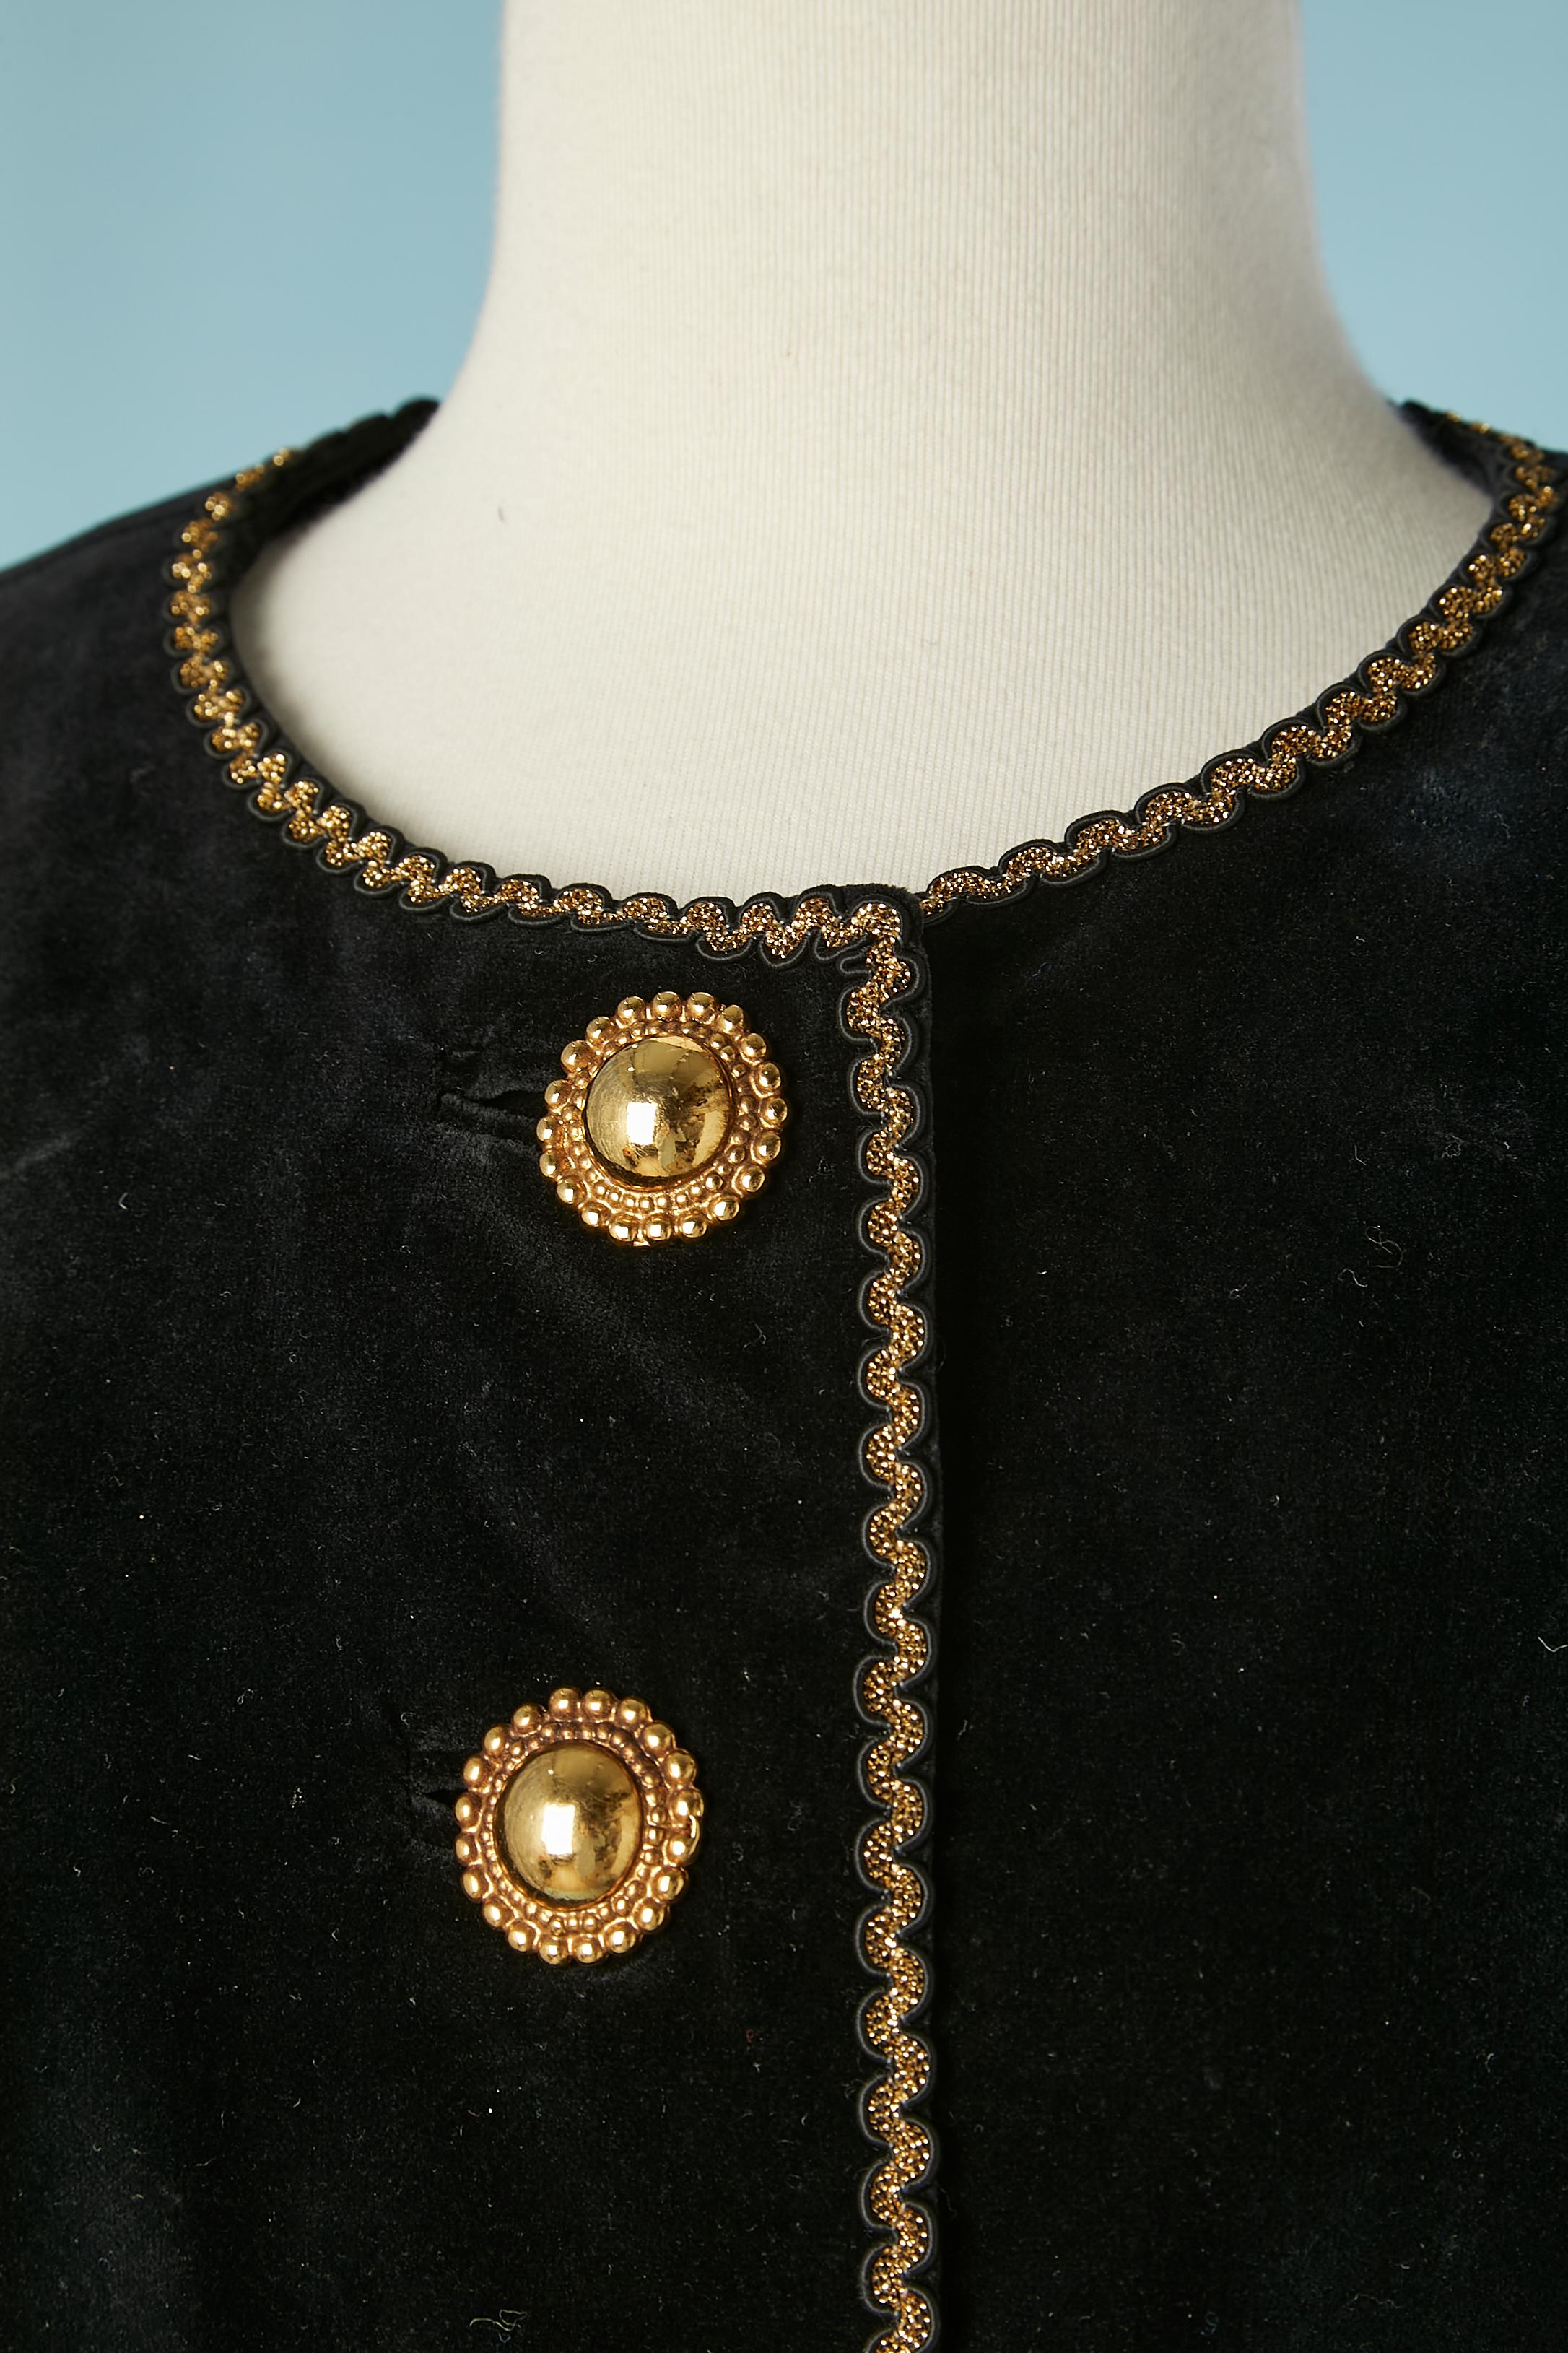 Black velvet cocktail skirt suit with gold metal buttons and gold lurex braid on waist and edge. 
Fabric composition: 70% cotton, 30% Cupro ( kind of rayon) 
Shoulders pads. 
SIZE 44 (Fr) 14 (US) 
